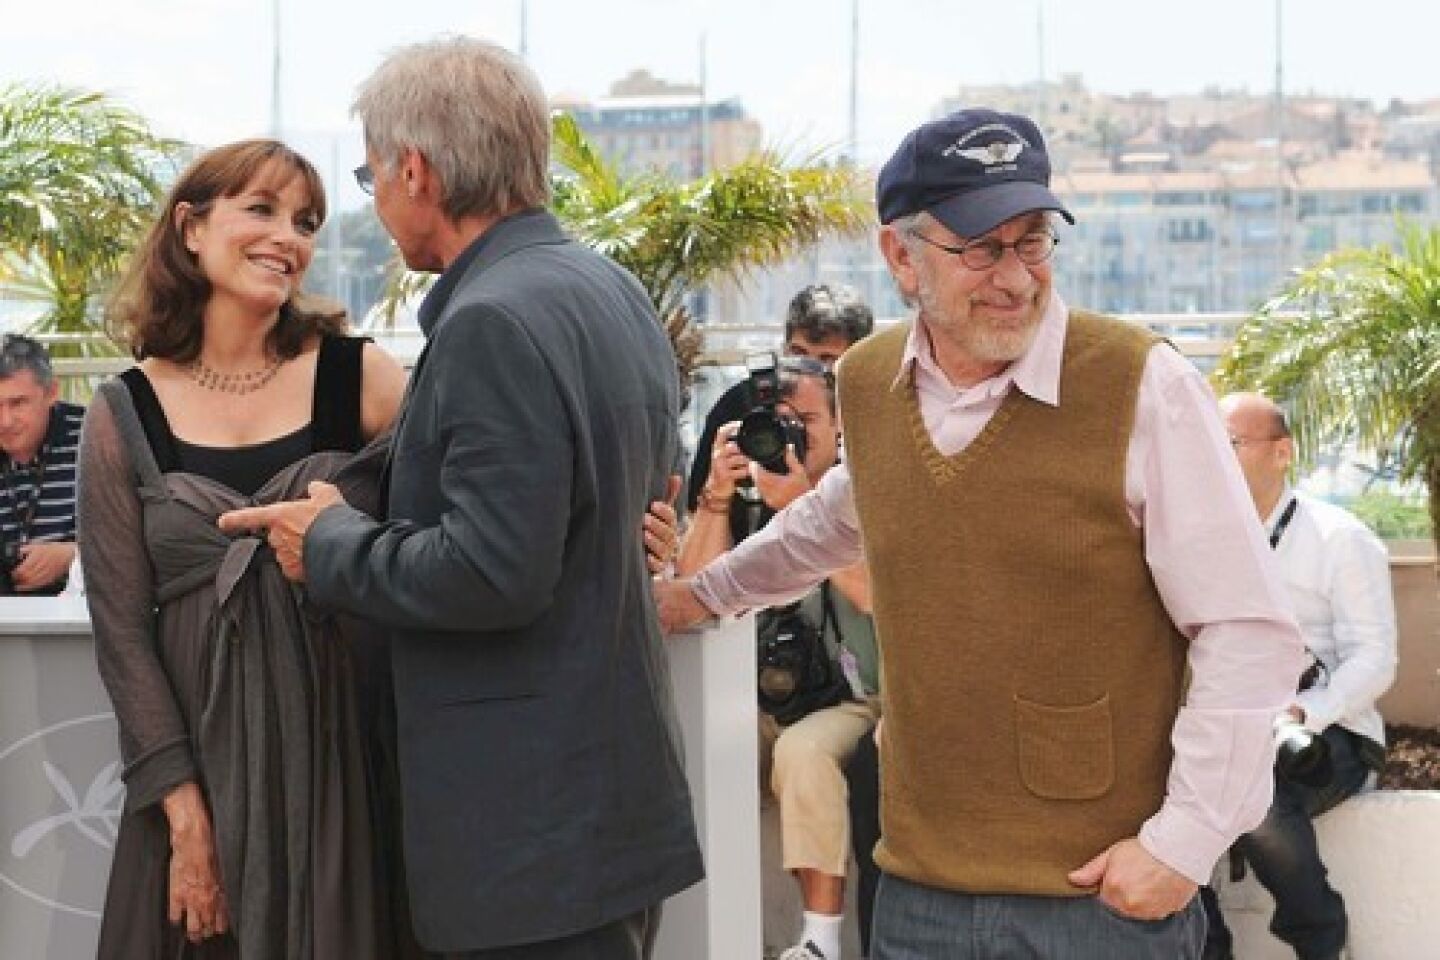 Karen Allen, Harrison Ford and Steven Spielberg arrive at the Cannes premiere for "Indiana Jones and the Kingdom of the Crystal Skull."